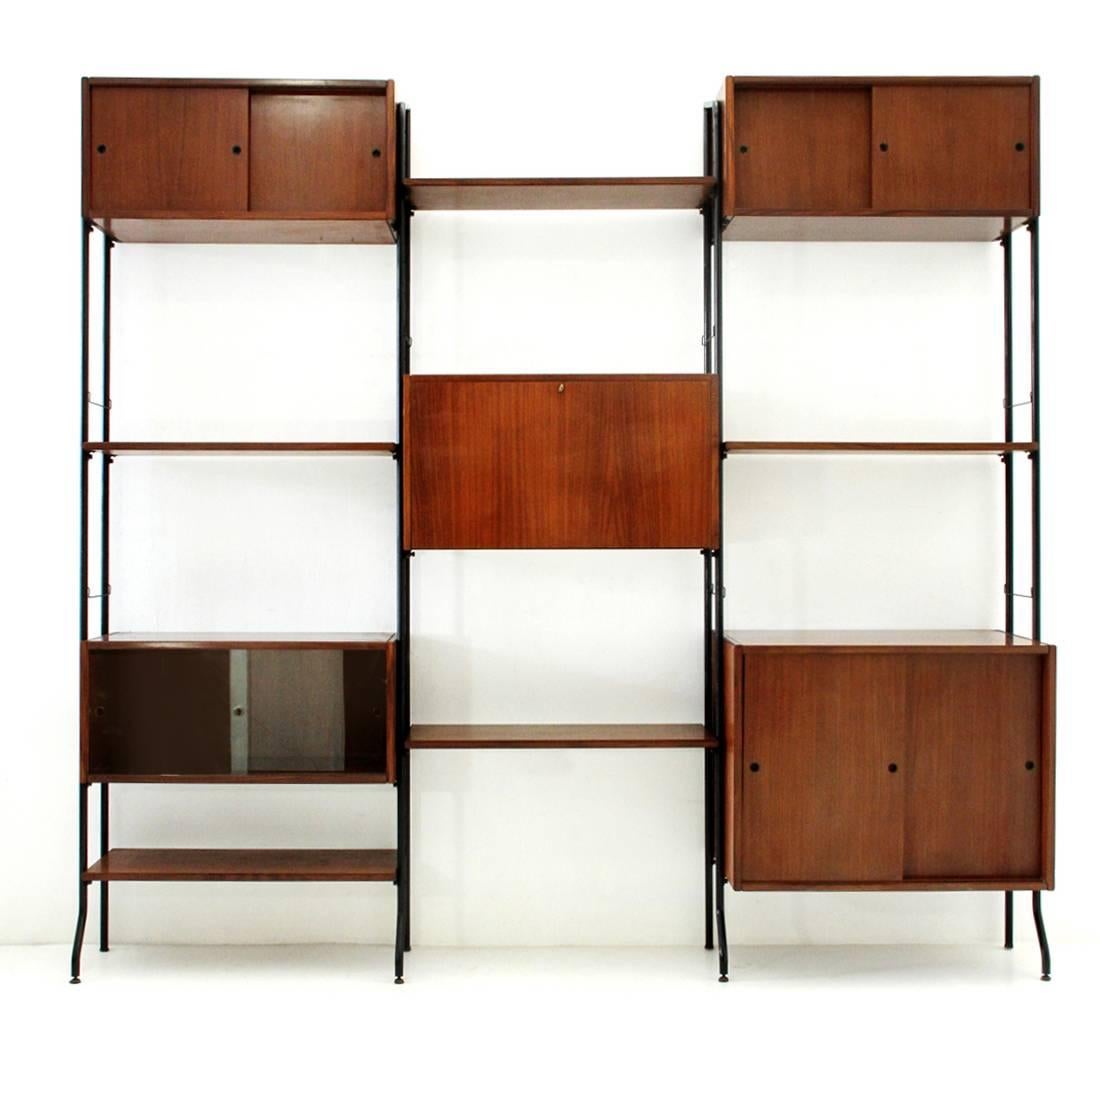 Large library produced by Amma di Torino in the 1950s.
Uprights in black painted folded metal tubing.
Adjustable brass feet.
Containers, drawers and shelves in veneered teak wood.
Brass screws.
Good general conditions, some signs due to normal